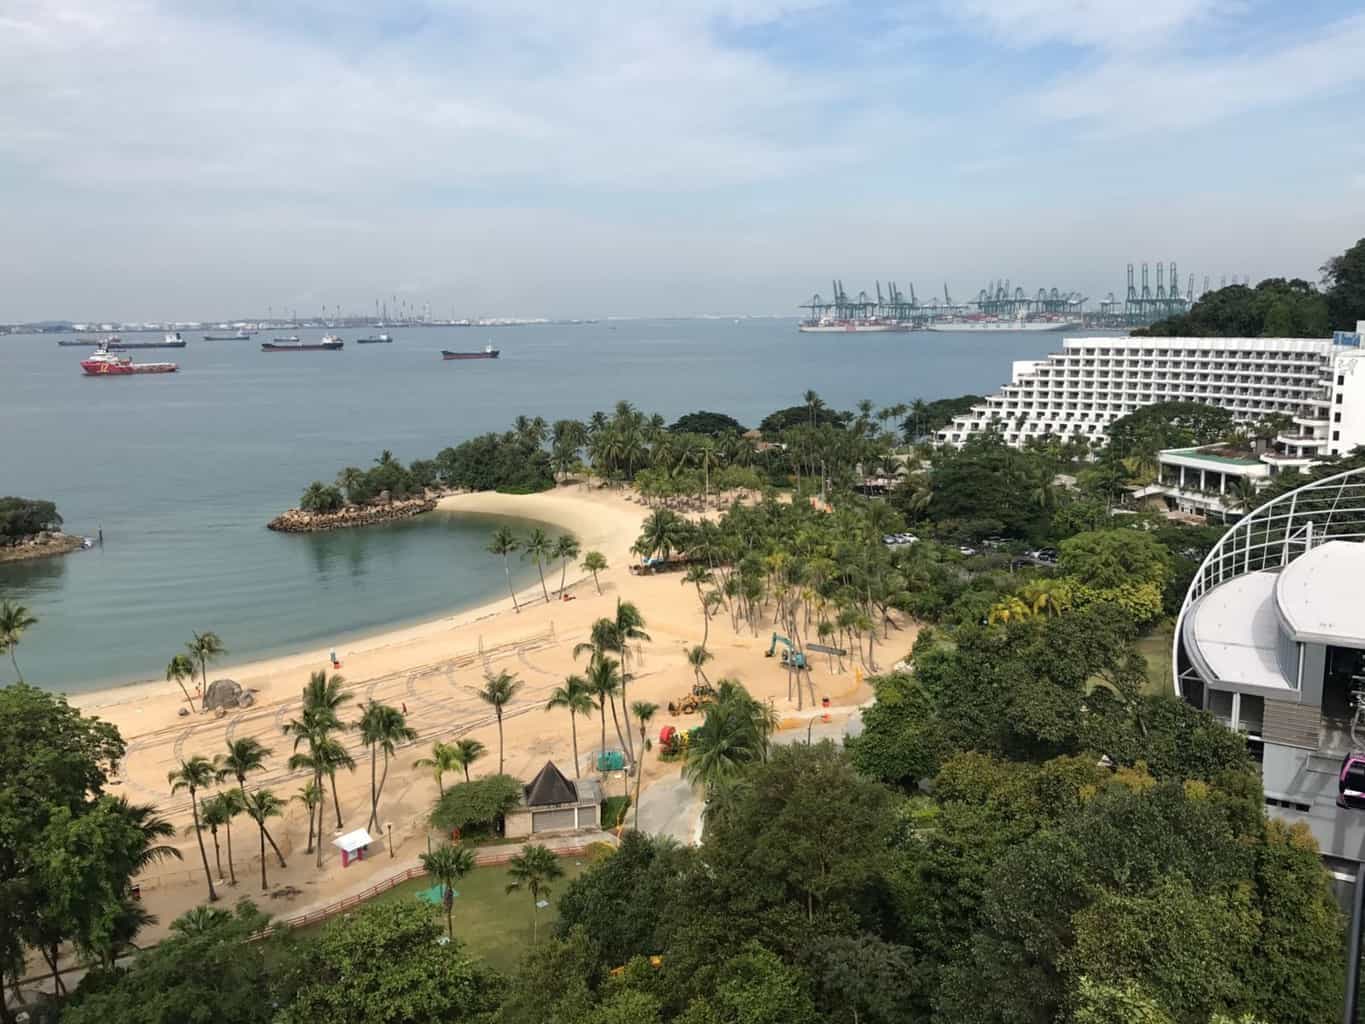 View of Siloso Beach and Shangri-La Rasa Sentosa from the cable car